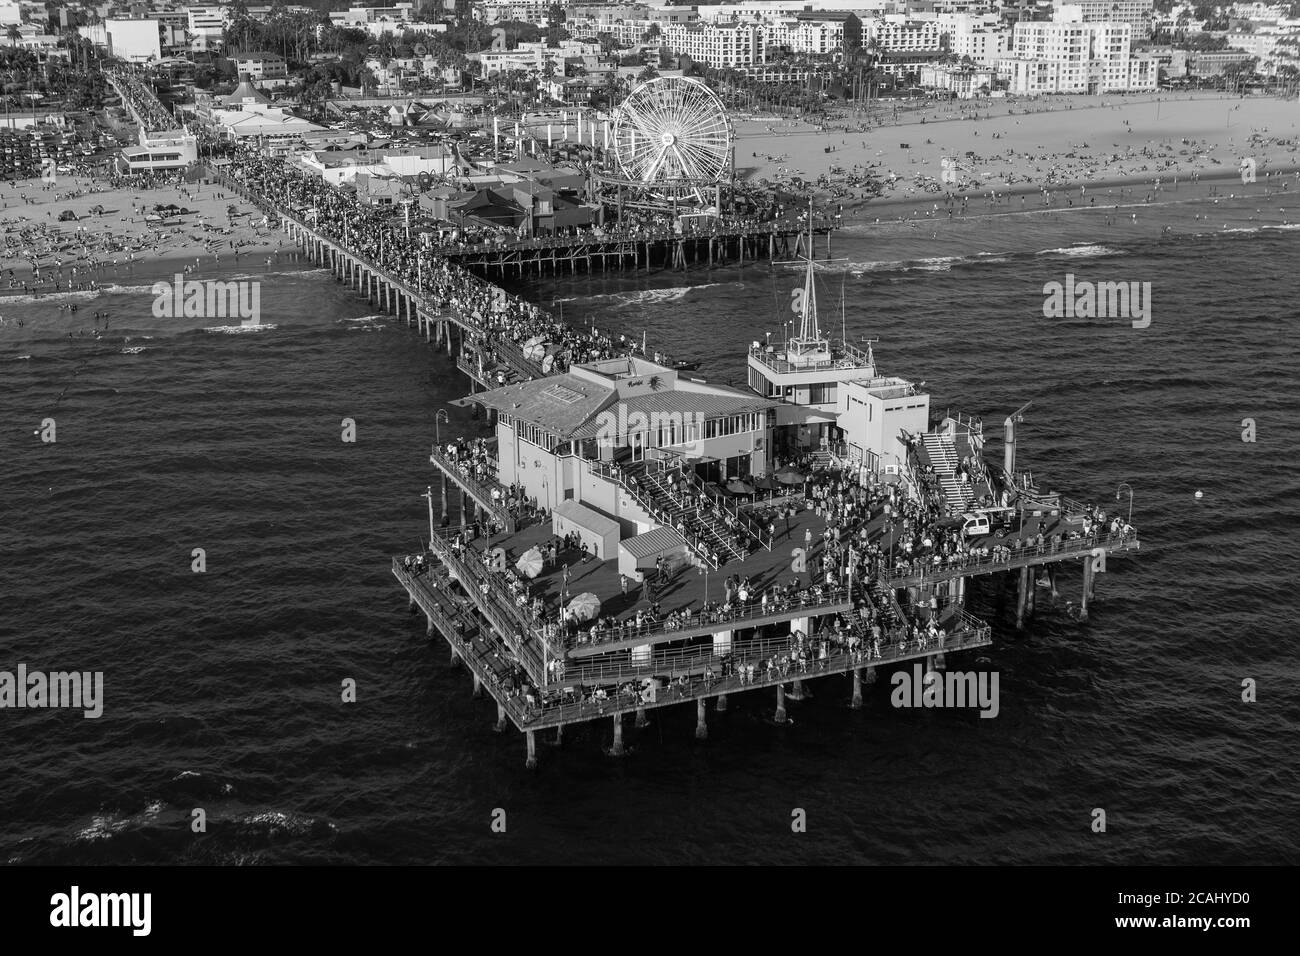 Black and white aerial view of crowded Santa Monica Pier and beach near Los Angeles on the Southern California coast. Stock Photo